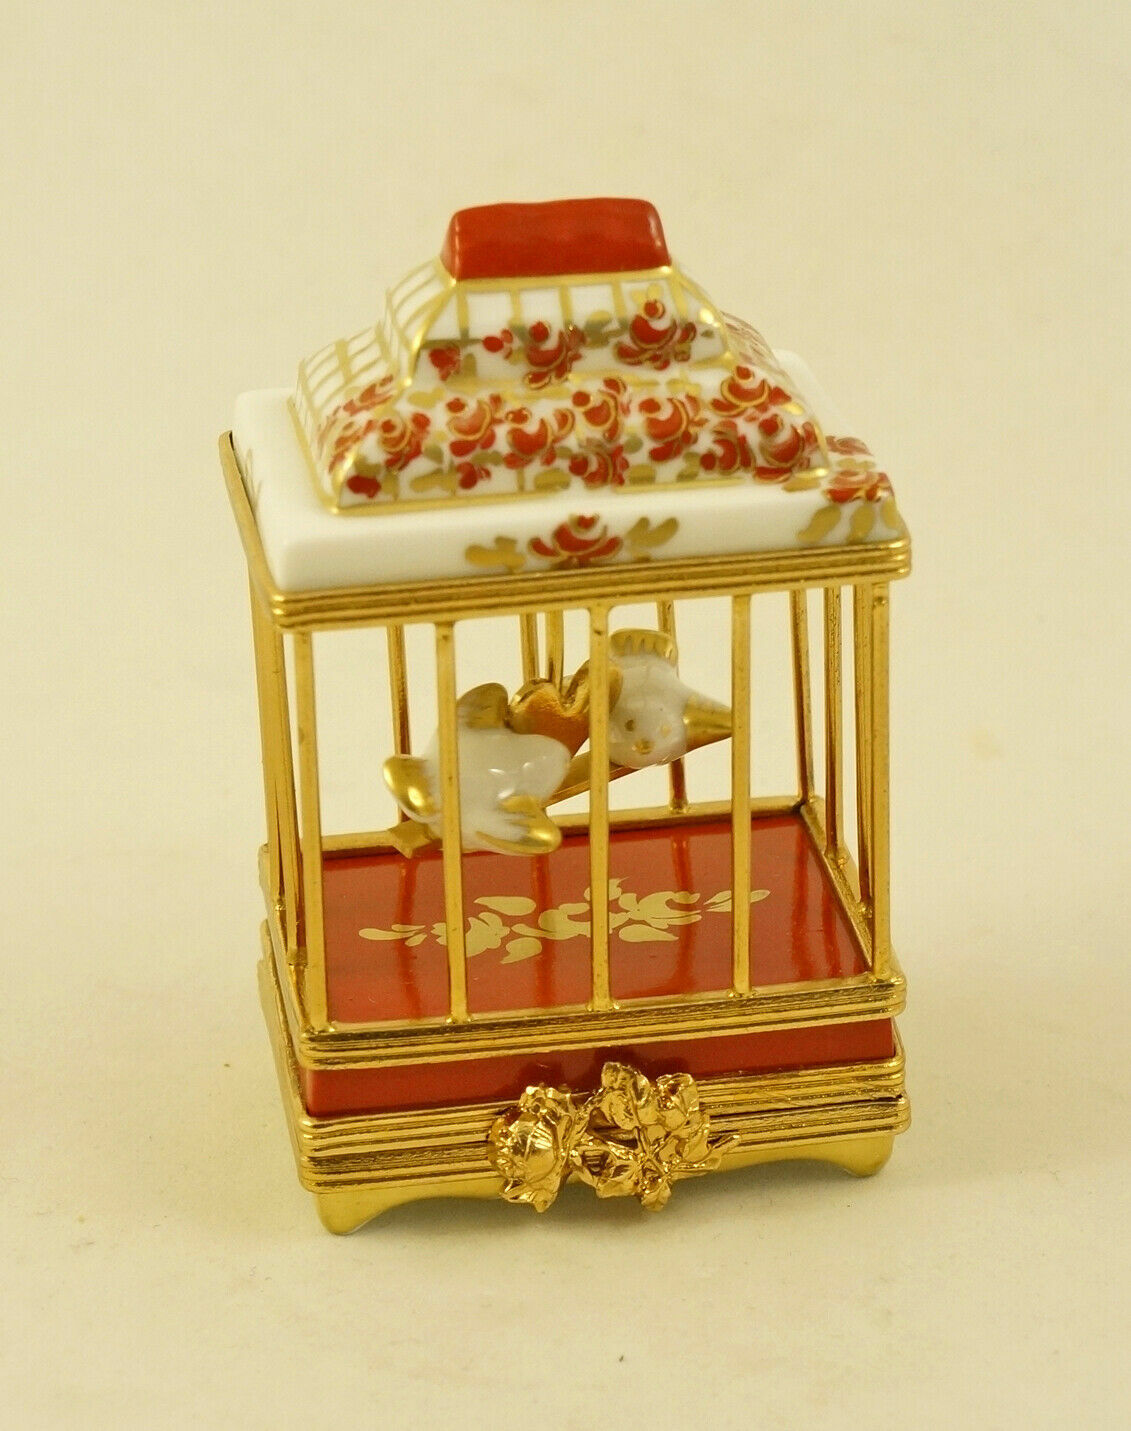 New French Limoges Trinket Box Cute Love Birds in Valentines Floral Cage w Roses